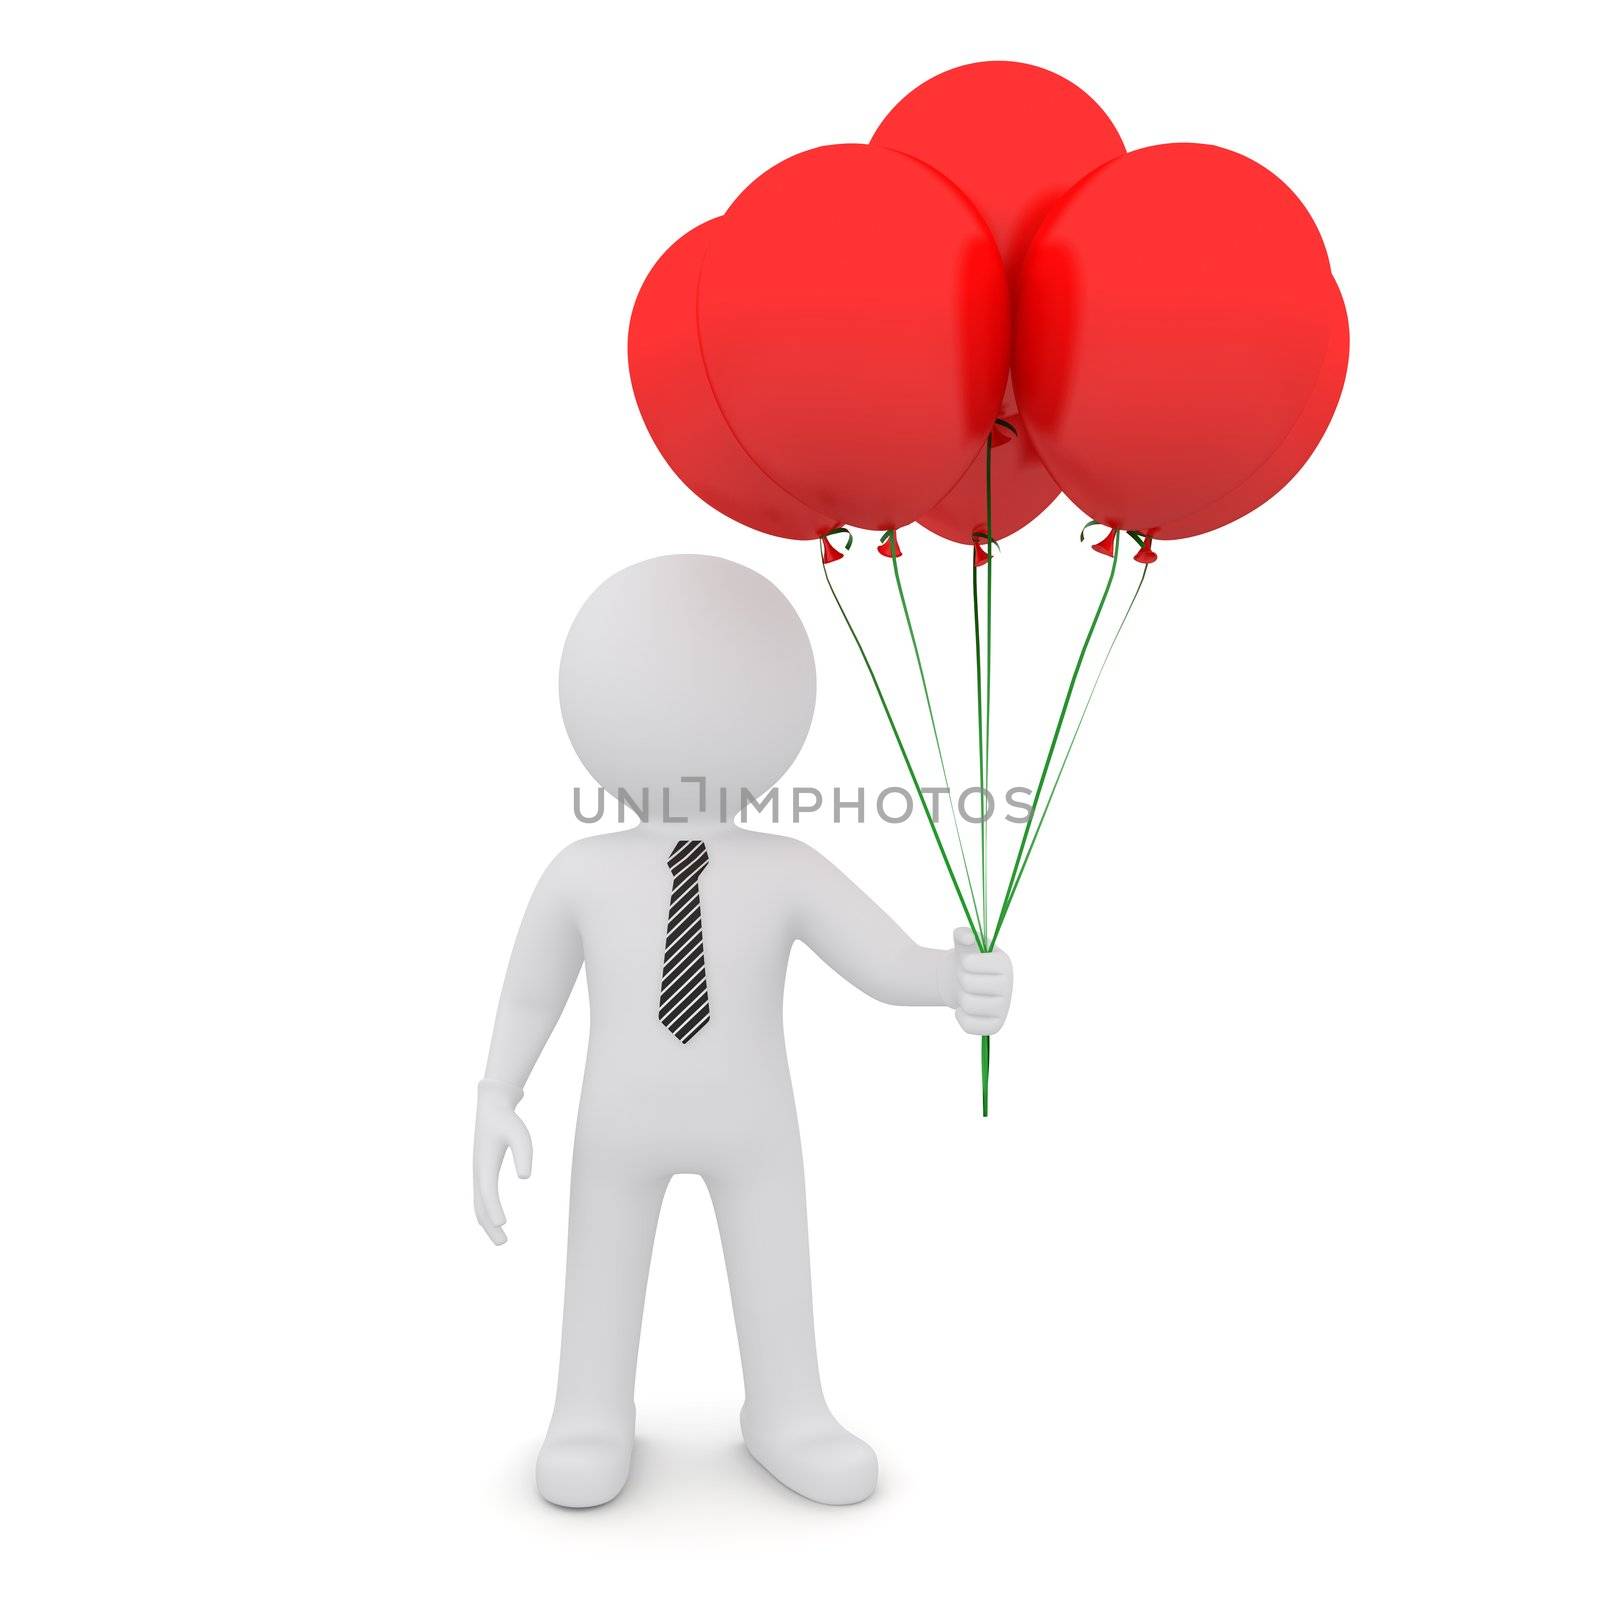 The white man is holding red balloons. Isolated on white background